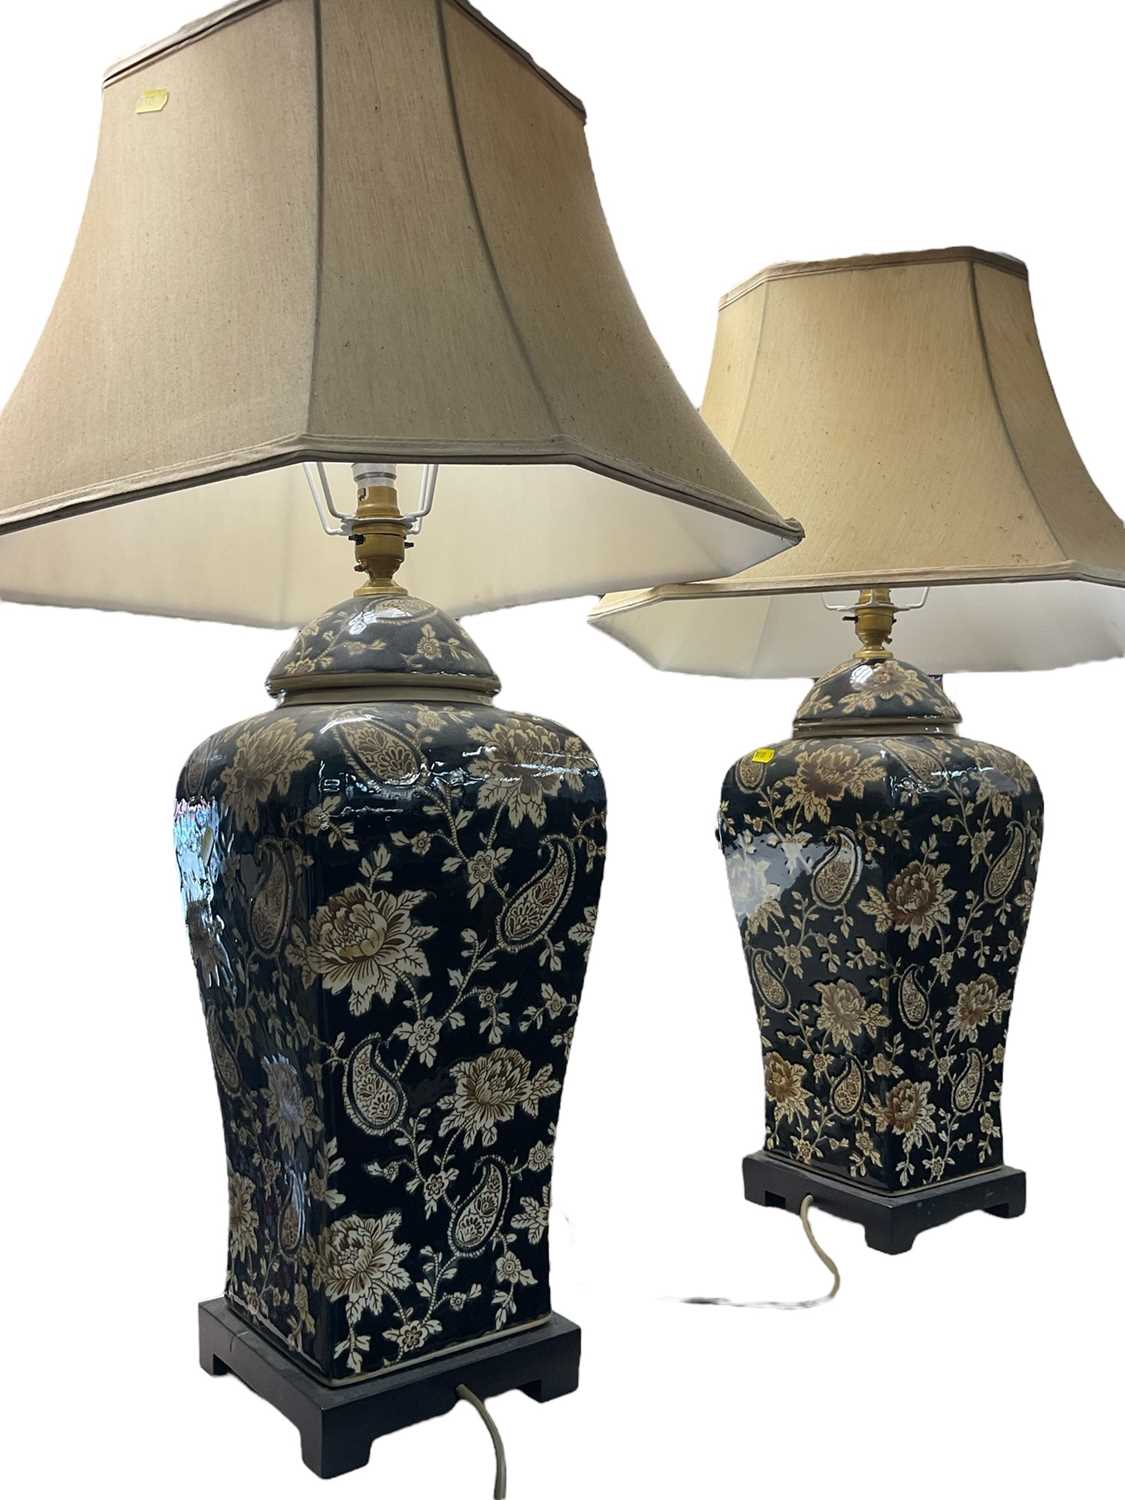 Pair of table lamps with shades - Image 2 of 2